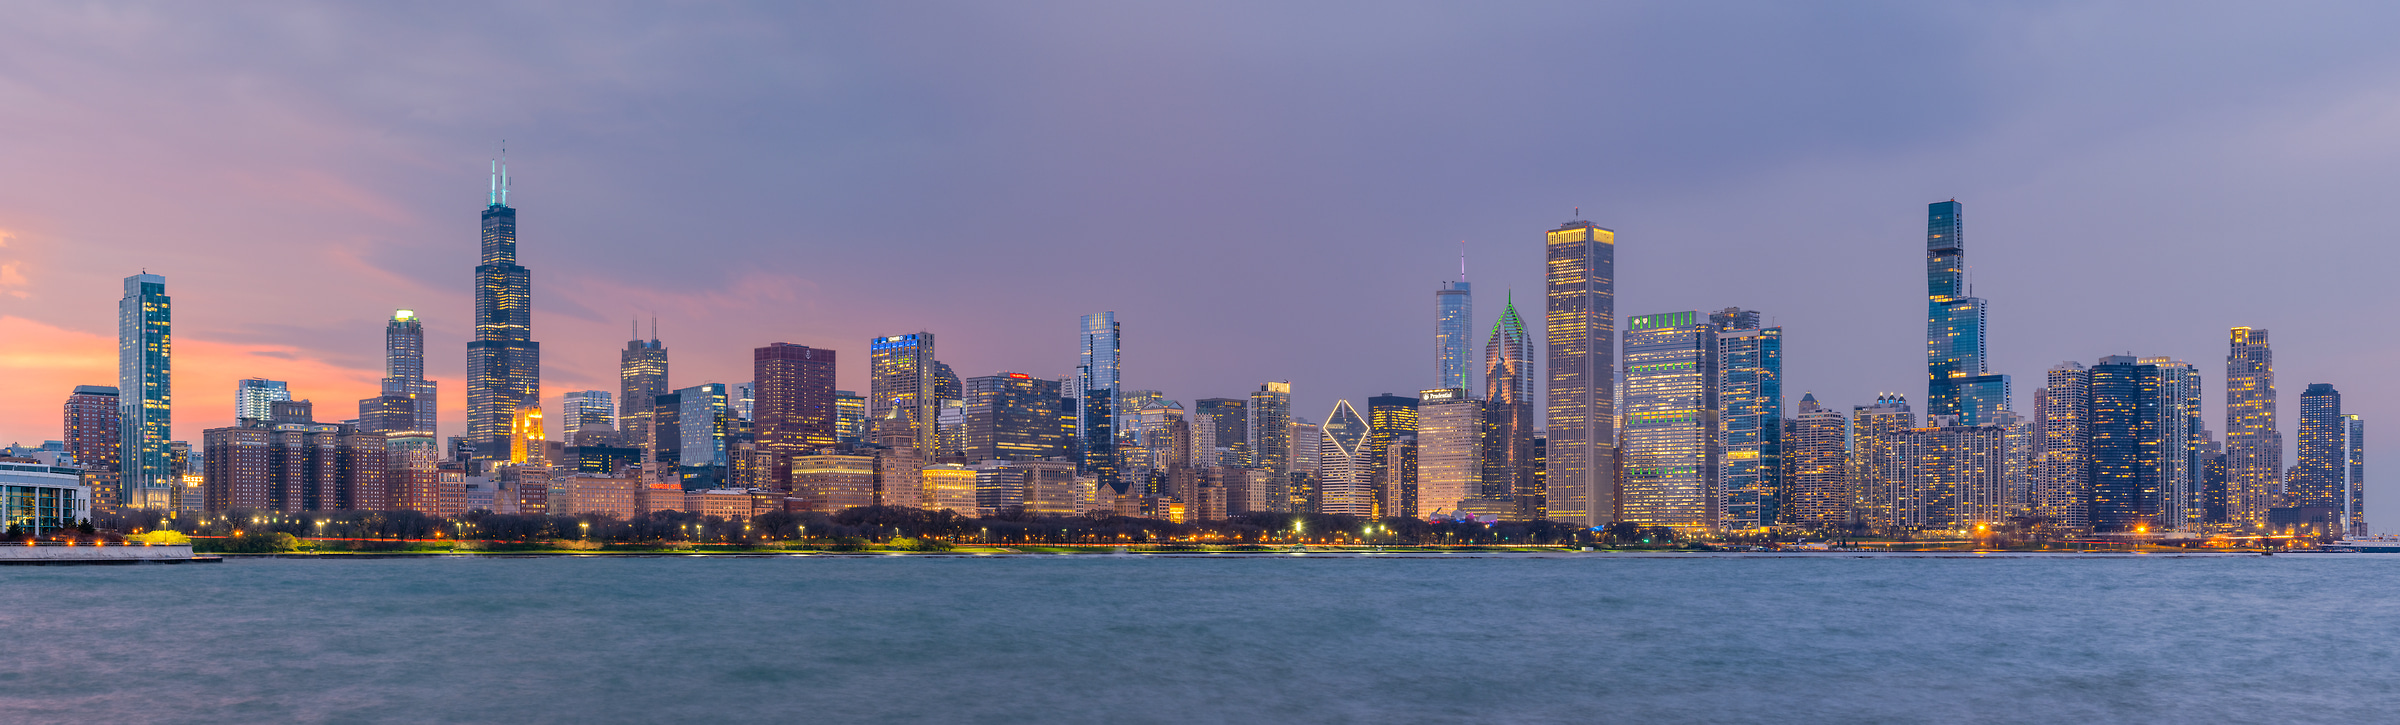 376 megapixels! A very high resolution, large-format VAST photo print of the Chicago skyline at sunset; cityscape photograph created by Chris Blake in Chicago, Illinois.